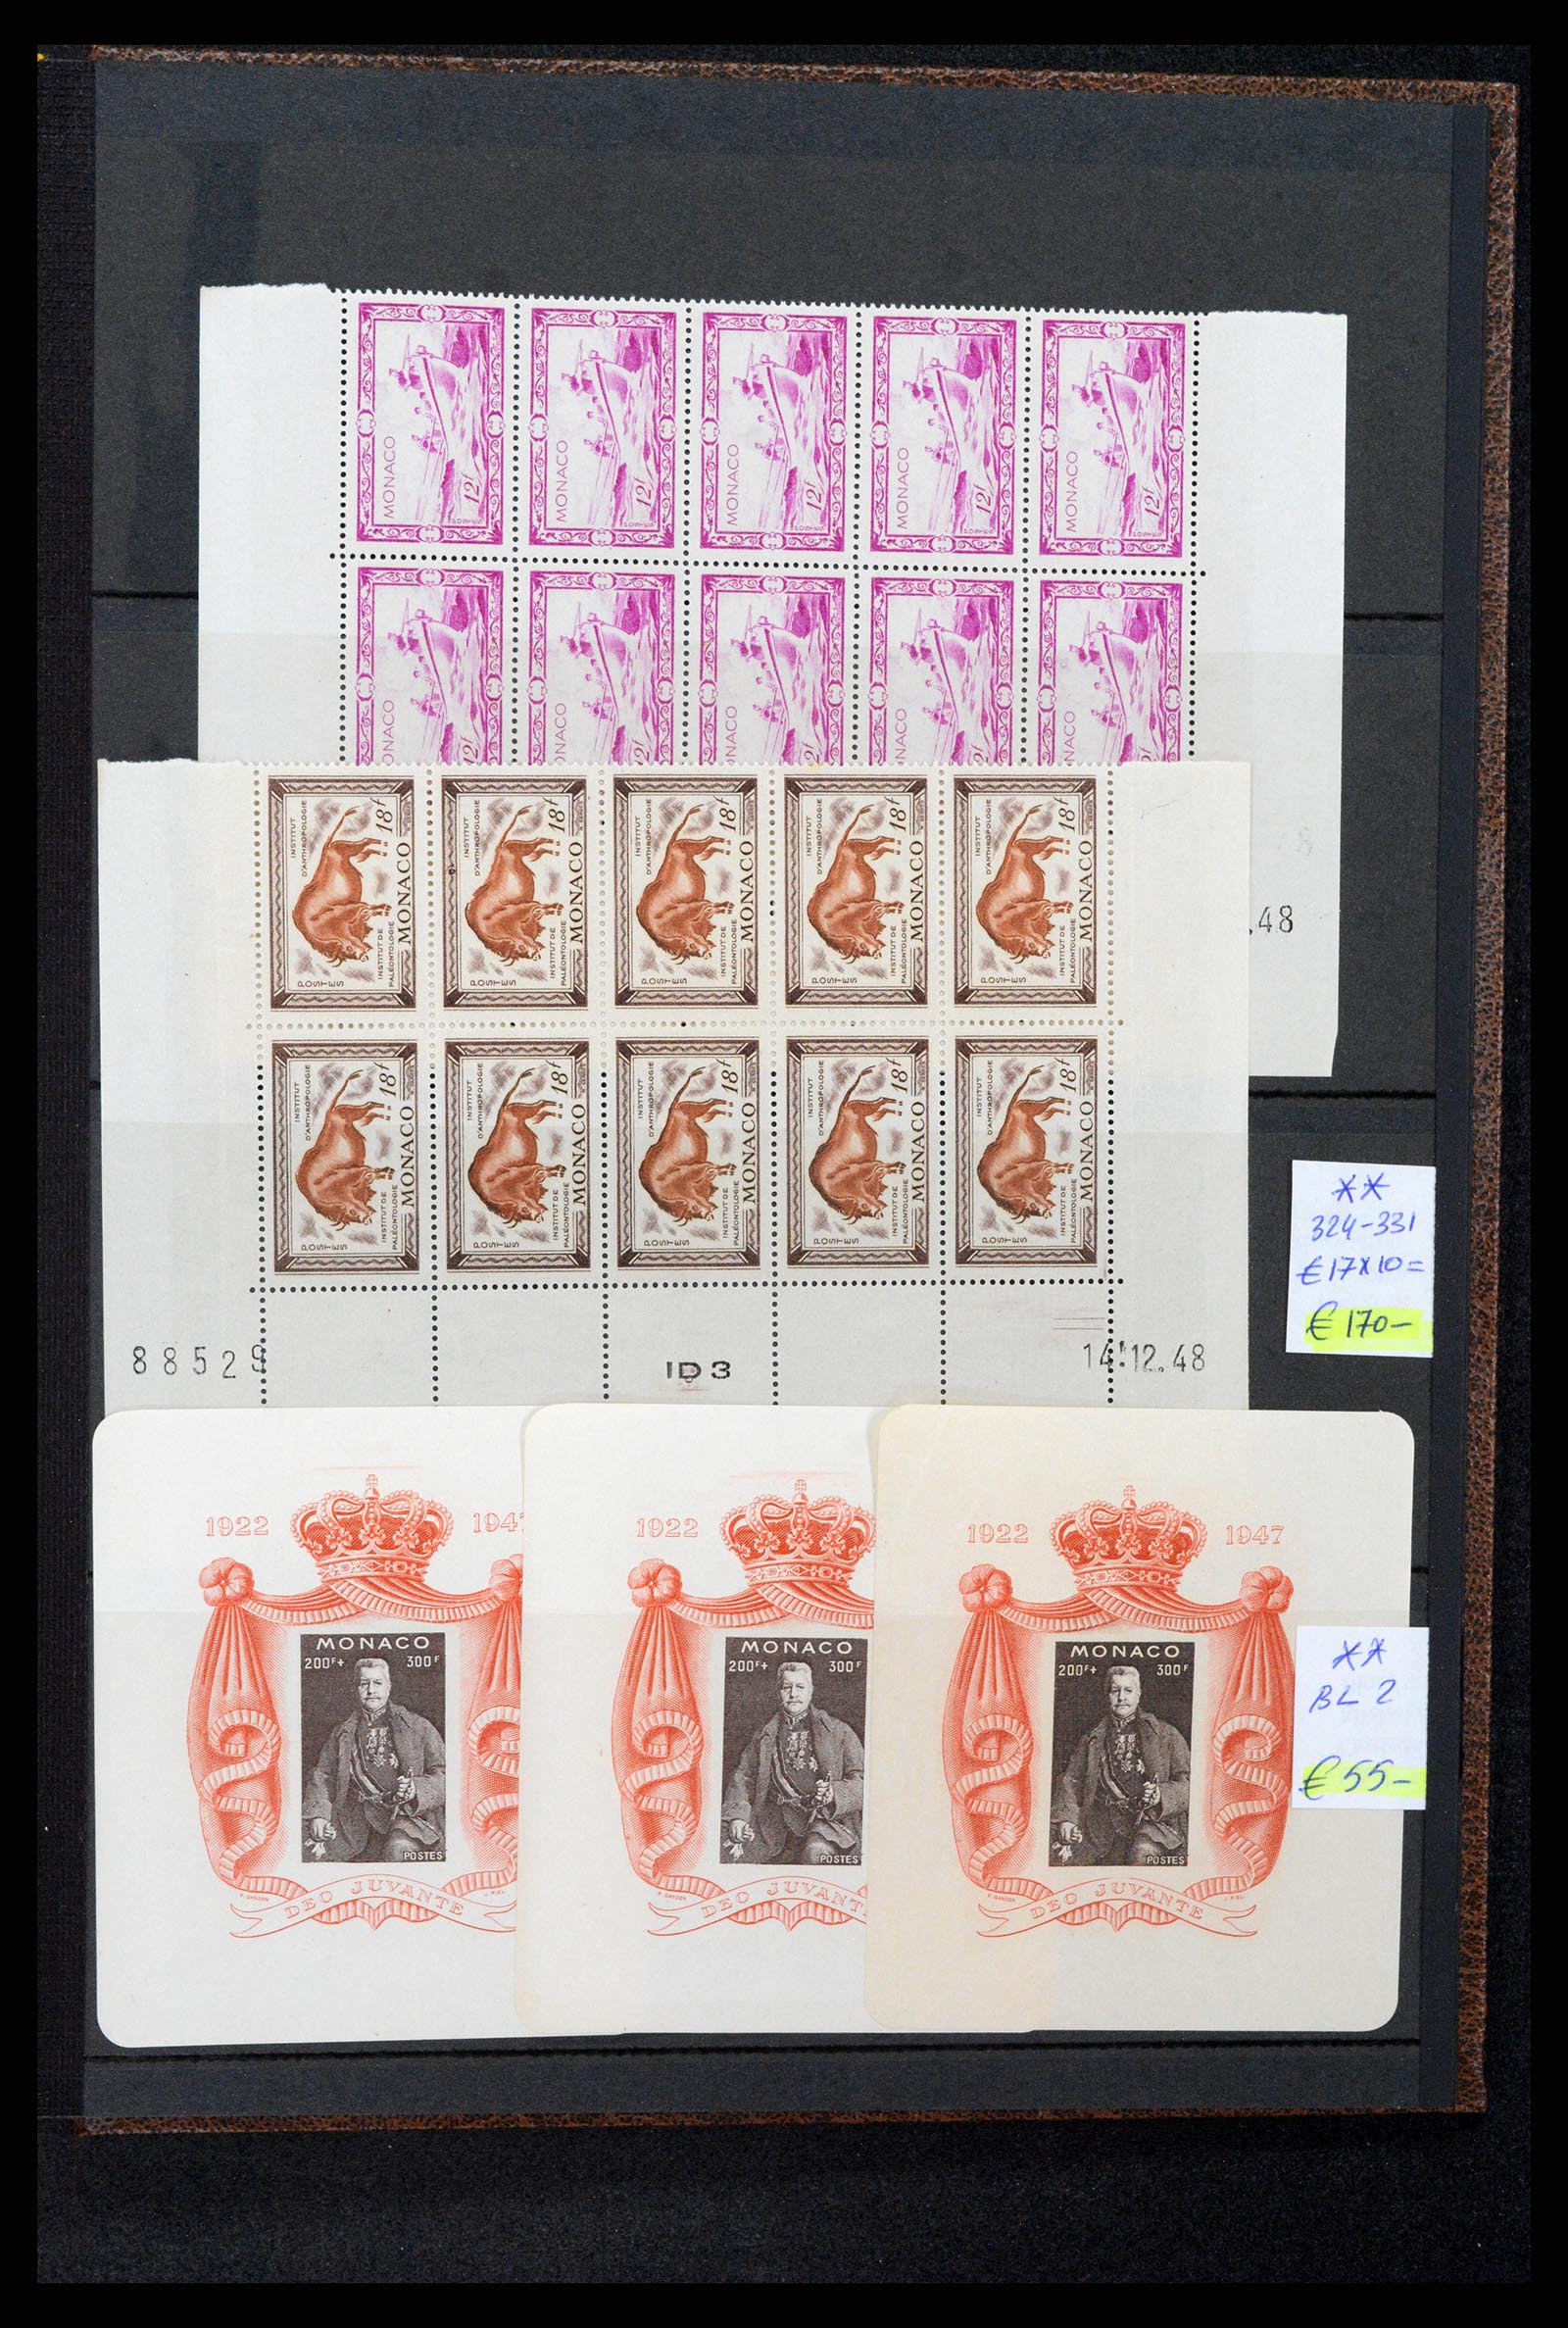 37984 128 - Stamp collection 37984 Monaco better issues 1942-1982.